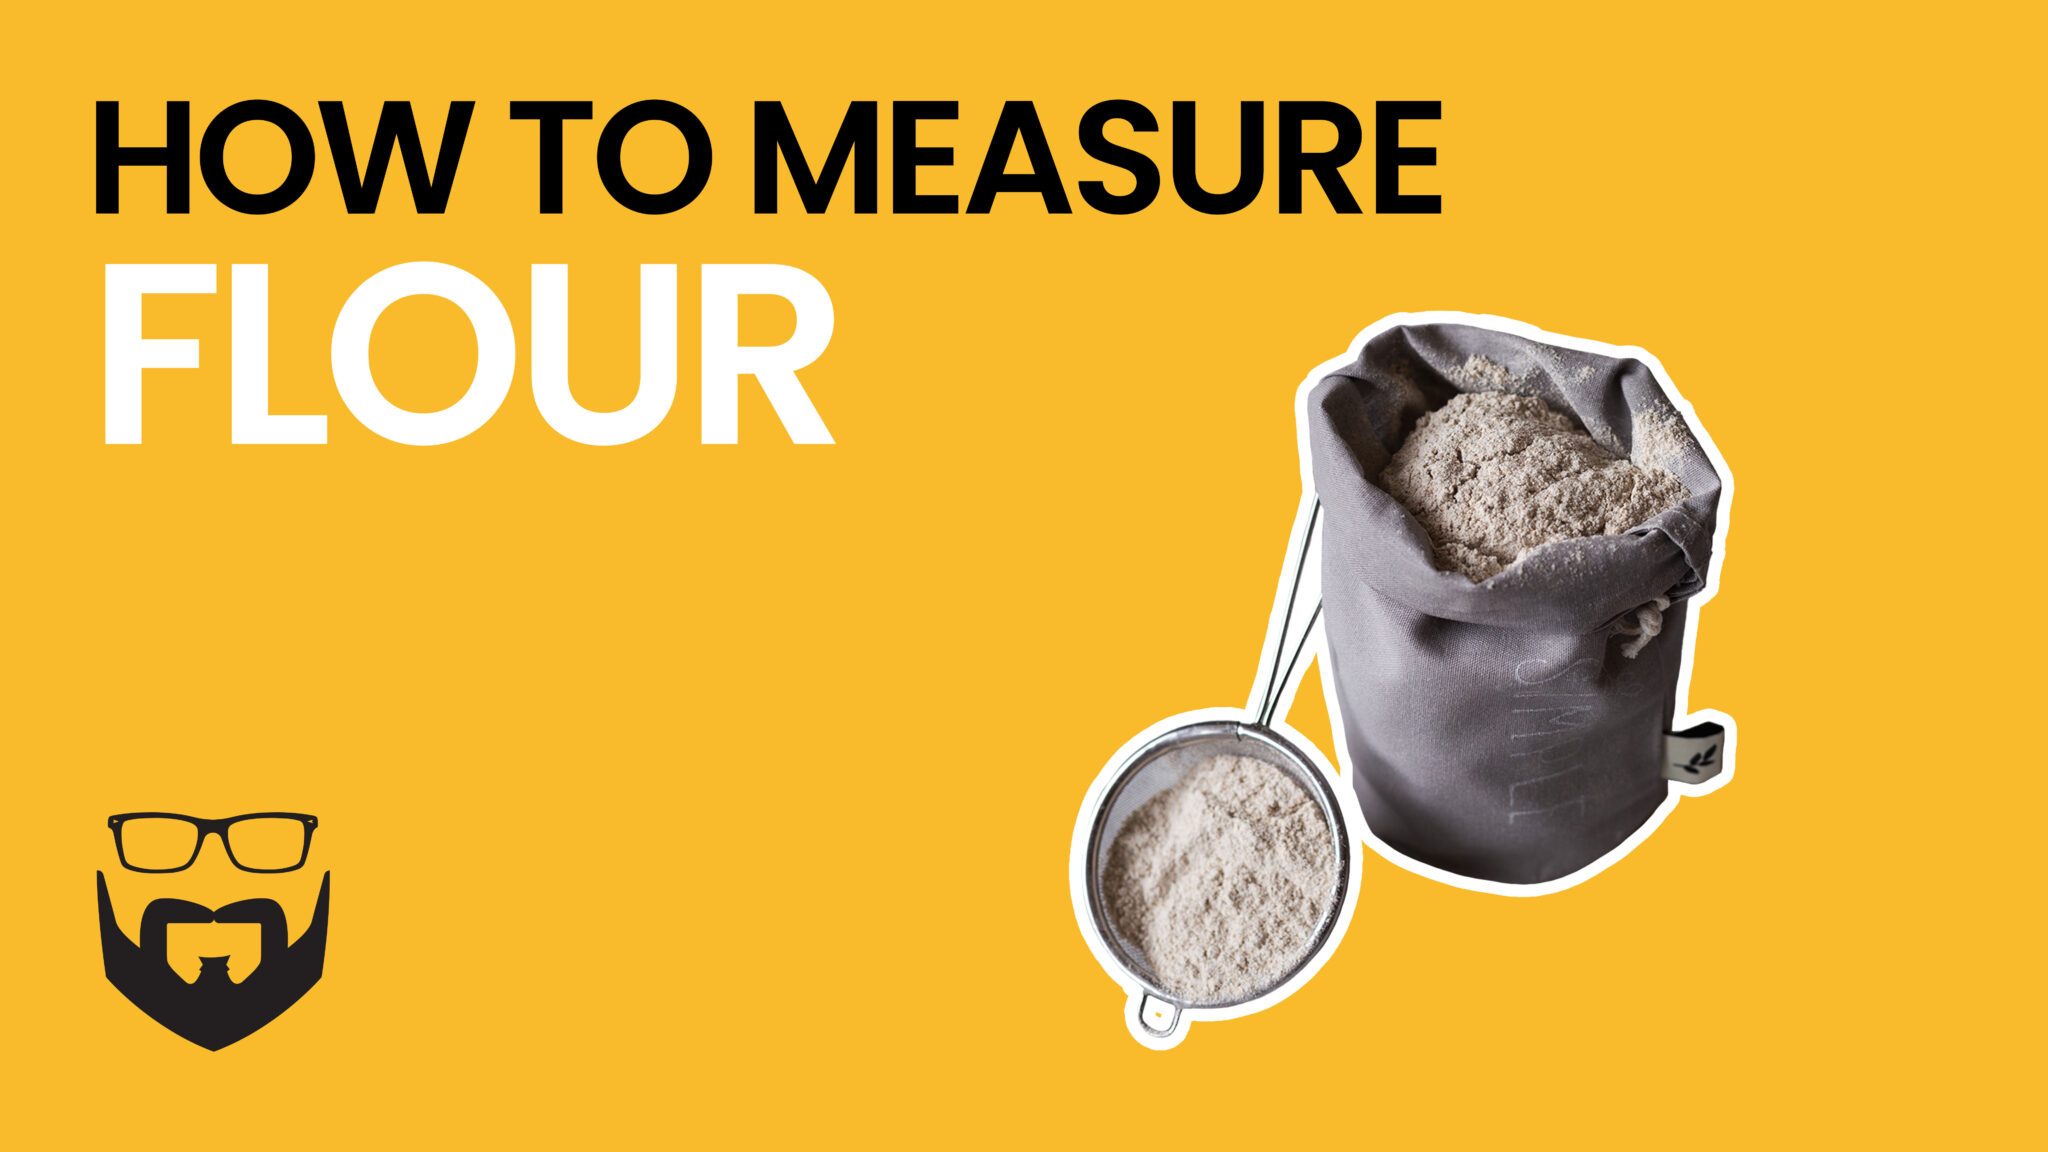 How to Measure Flour Video - Yellow